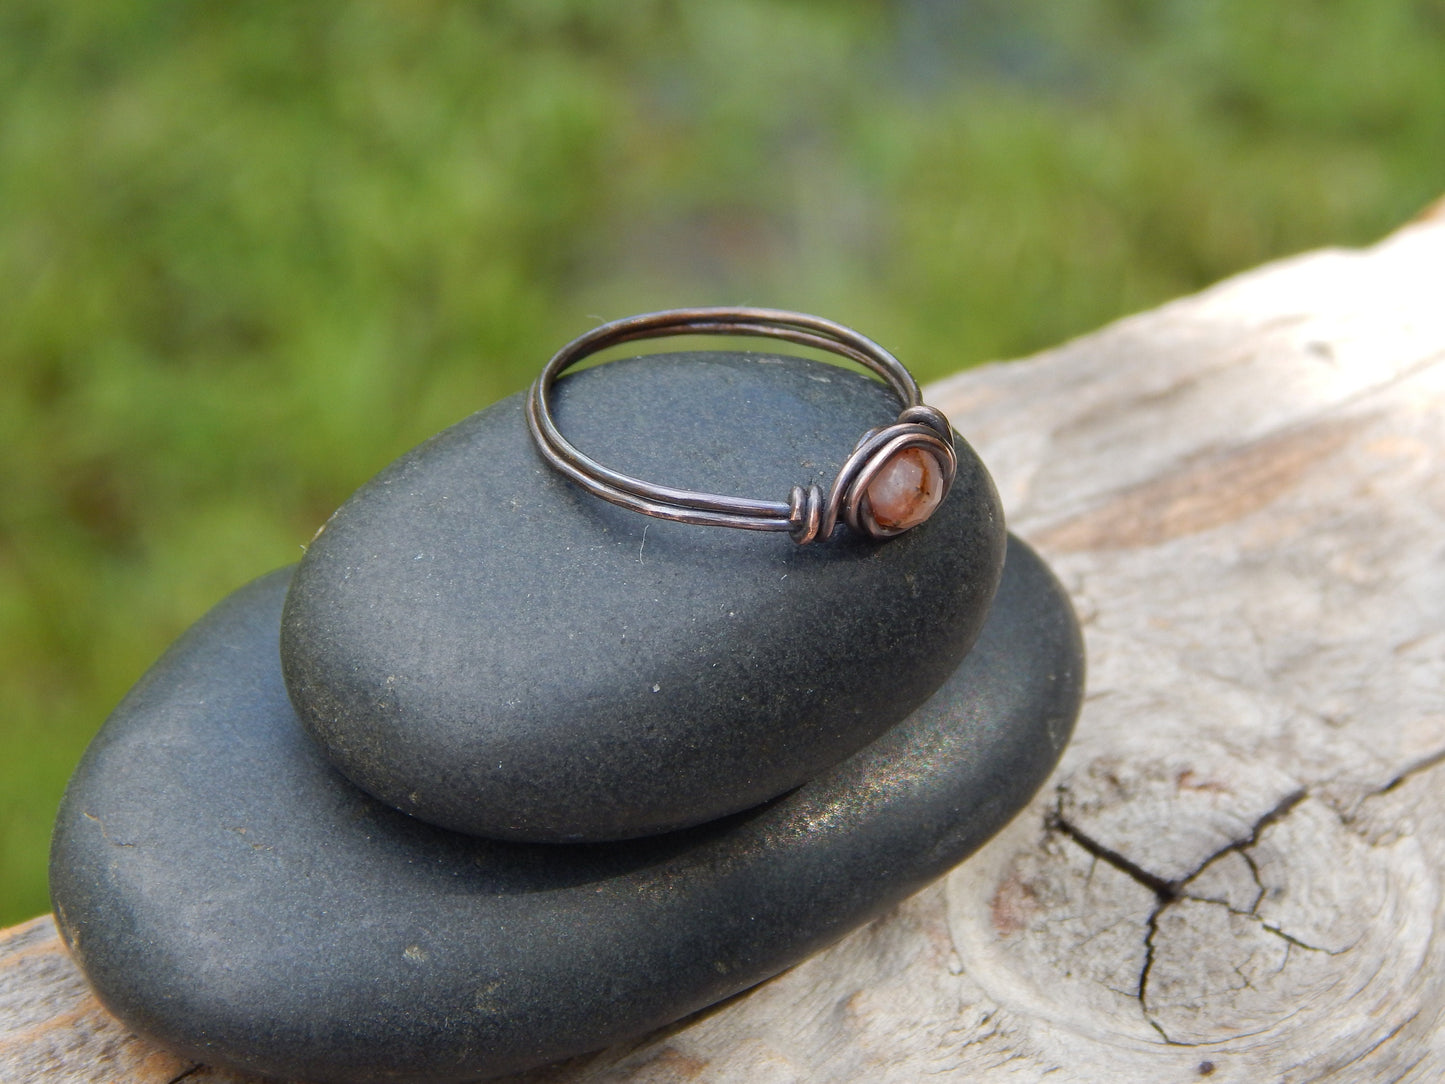 Wire wrapped pink opal size 8.5 ring